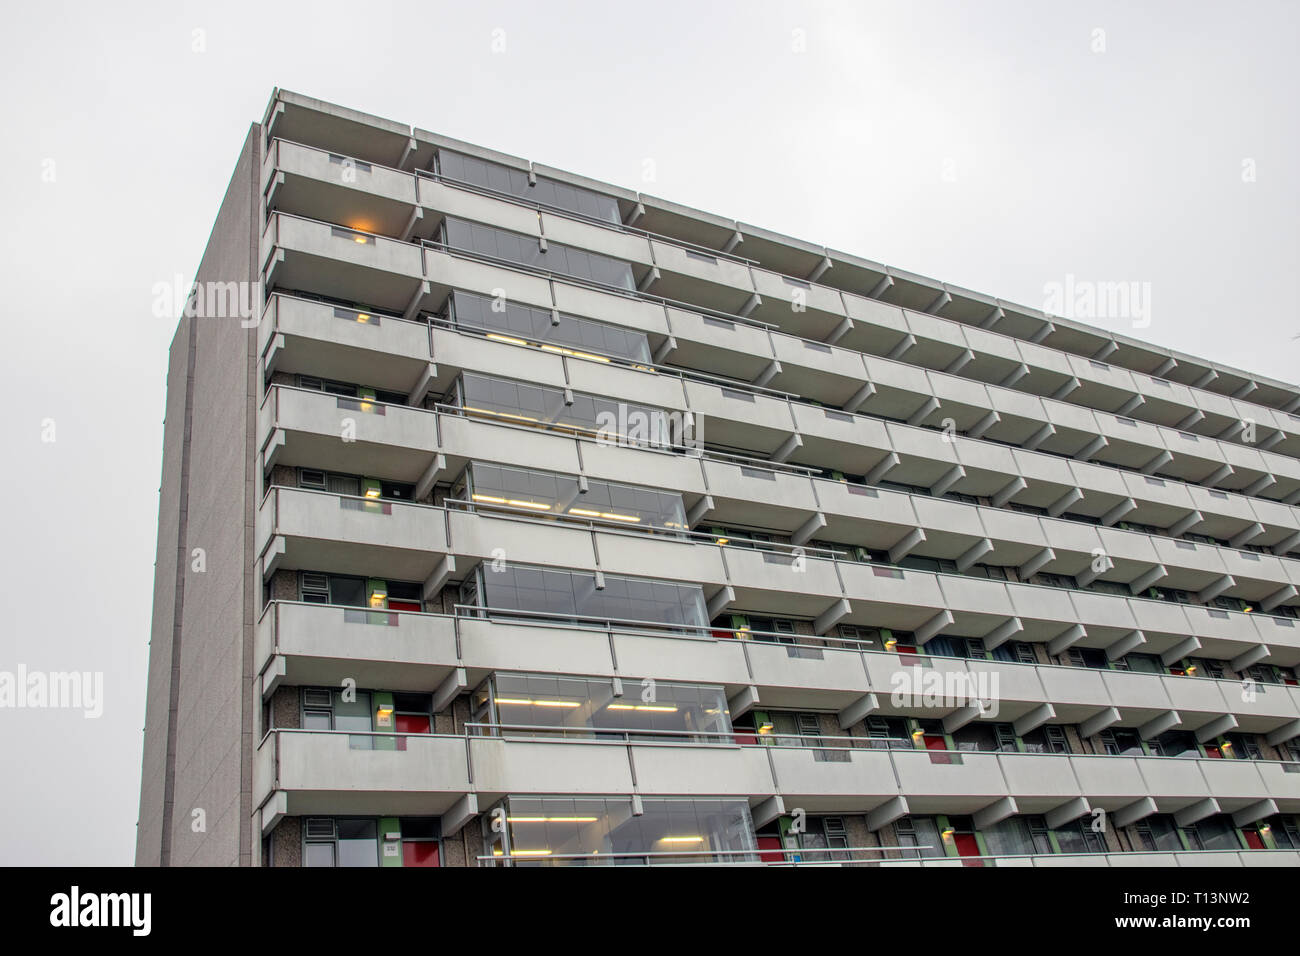 Flat At The Grubbehoeve The Bijlmer Amsterdam The Netherlands 2019 Stock Photo